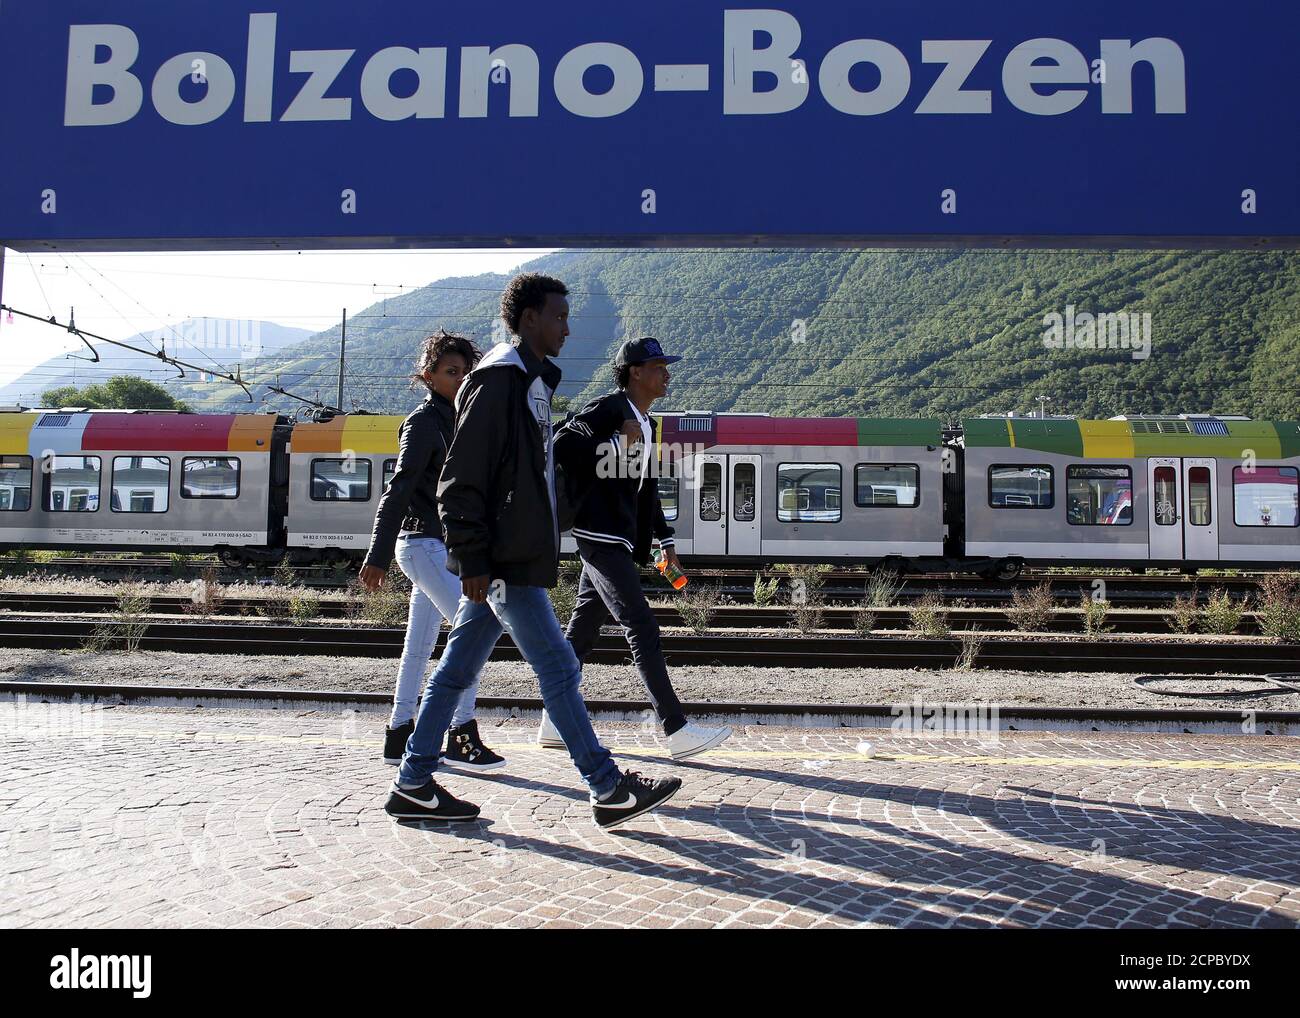 Dejen Asefaw (R), a 24-year-old Eritrean, arrives at the Bolzano railway station, northern Italy, May 28, 2015. EU asylum rules, known as the Dublin Regulation, were first drafted in the early 1990s and require people seeking refuge to do so in the European country where they first set foot. Northern European countries defend the policy as a way to prevent multiple applications across the continent. Some are upset with what they see as Italy's lax attitude to registering asylum seekers. Earlier this year, French police stopped about 1,000 migrants near the border and returned them to Italy. Sm Stock Photo